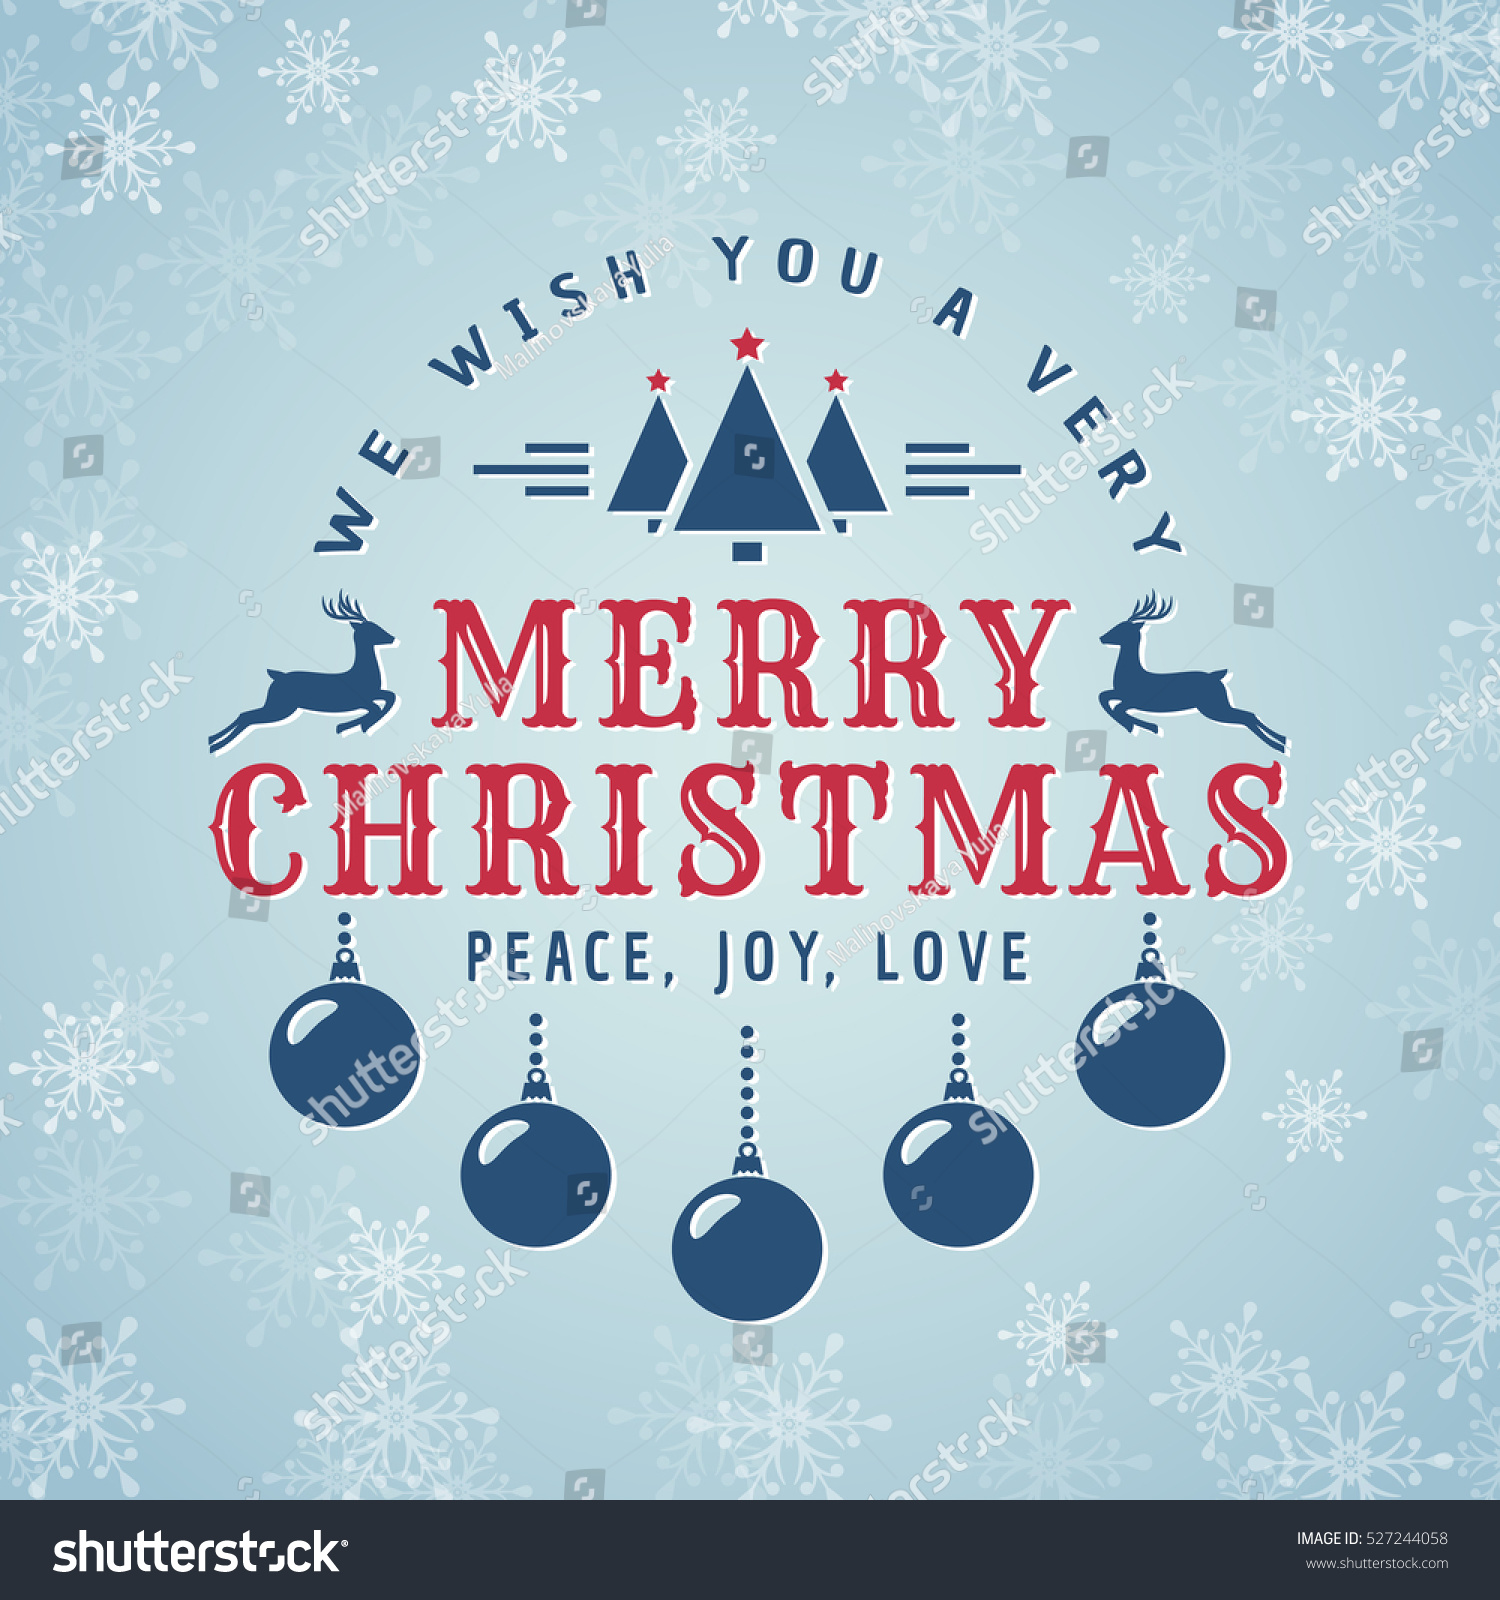 Merry Christmas Greeting card with snowflakes background and elegant typography badge Vector illustration